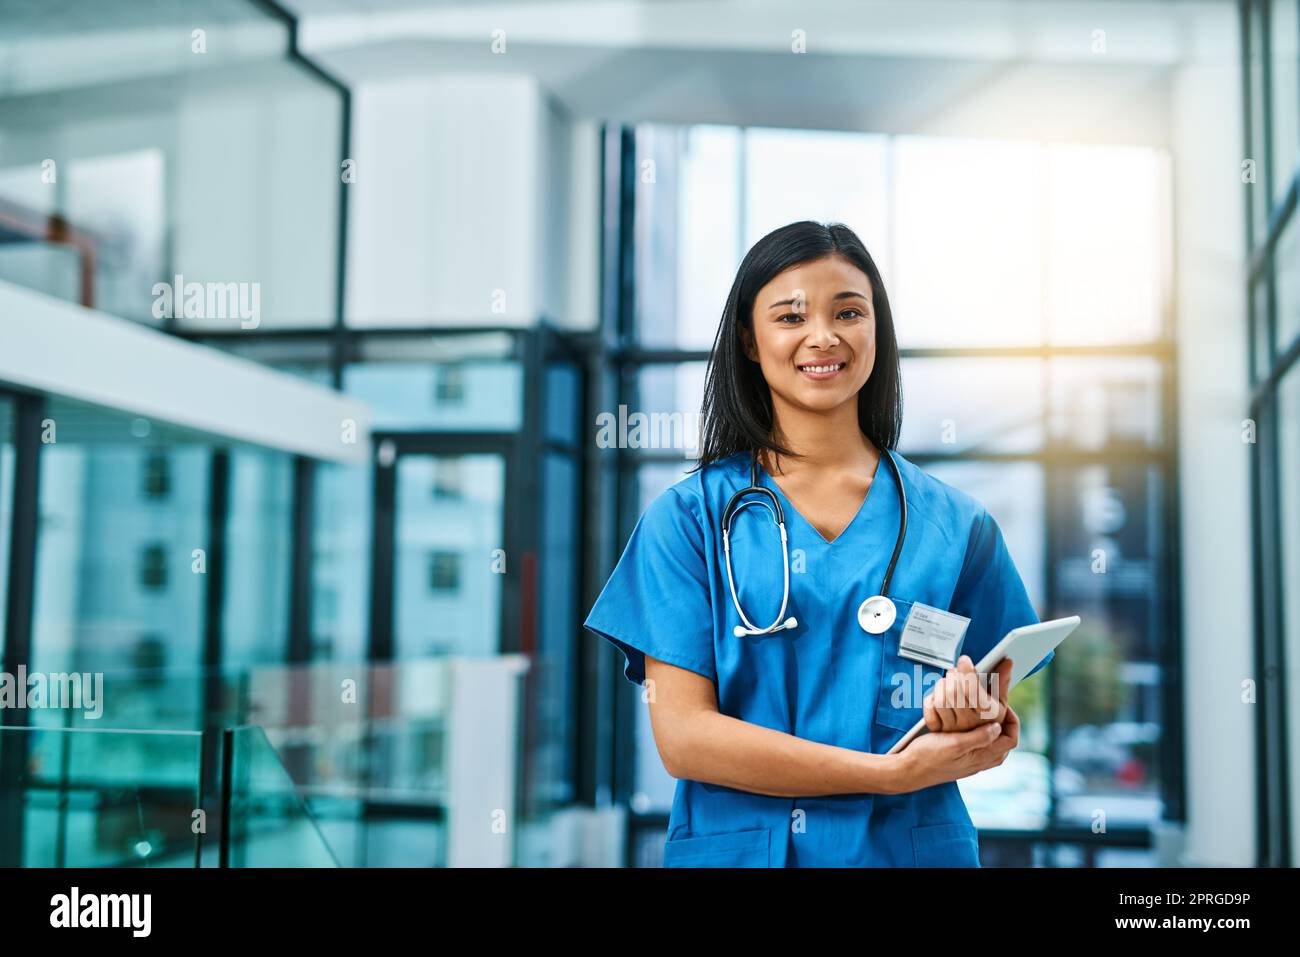 Here to offer guidance to all your health concerns. Portrait of a young nurse standing in a hospital. Stock Photo